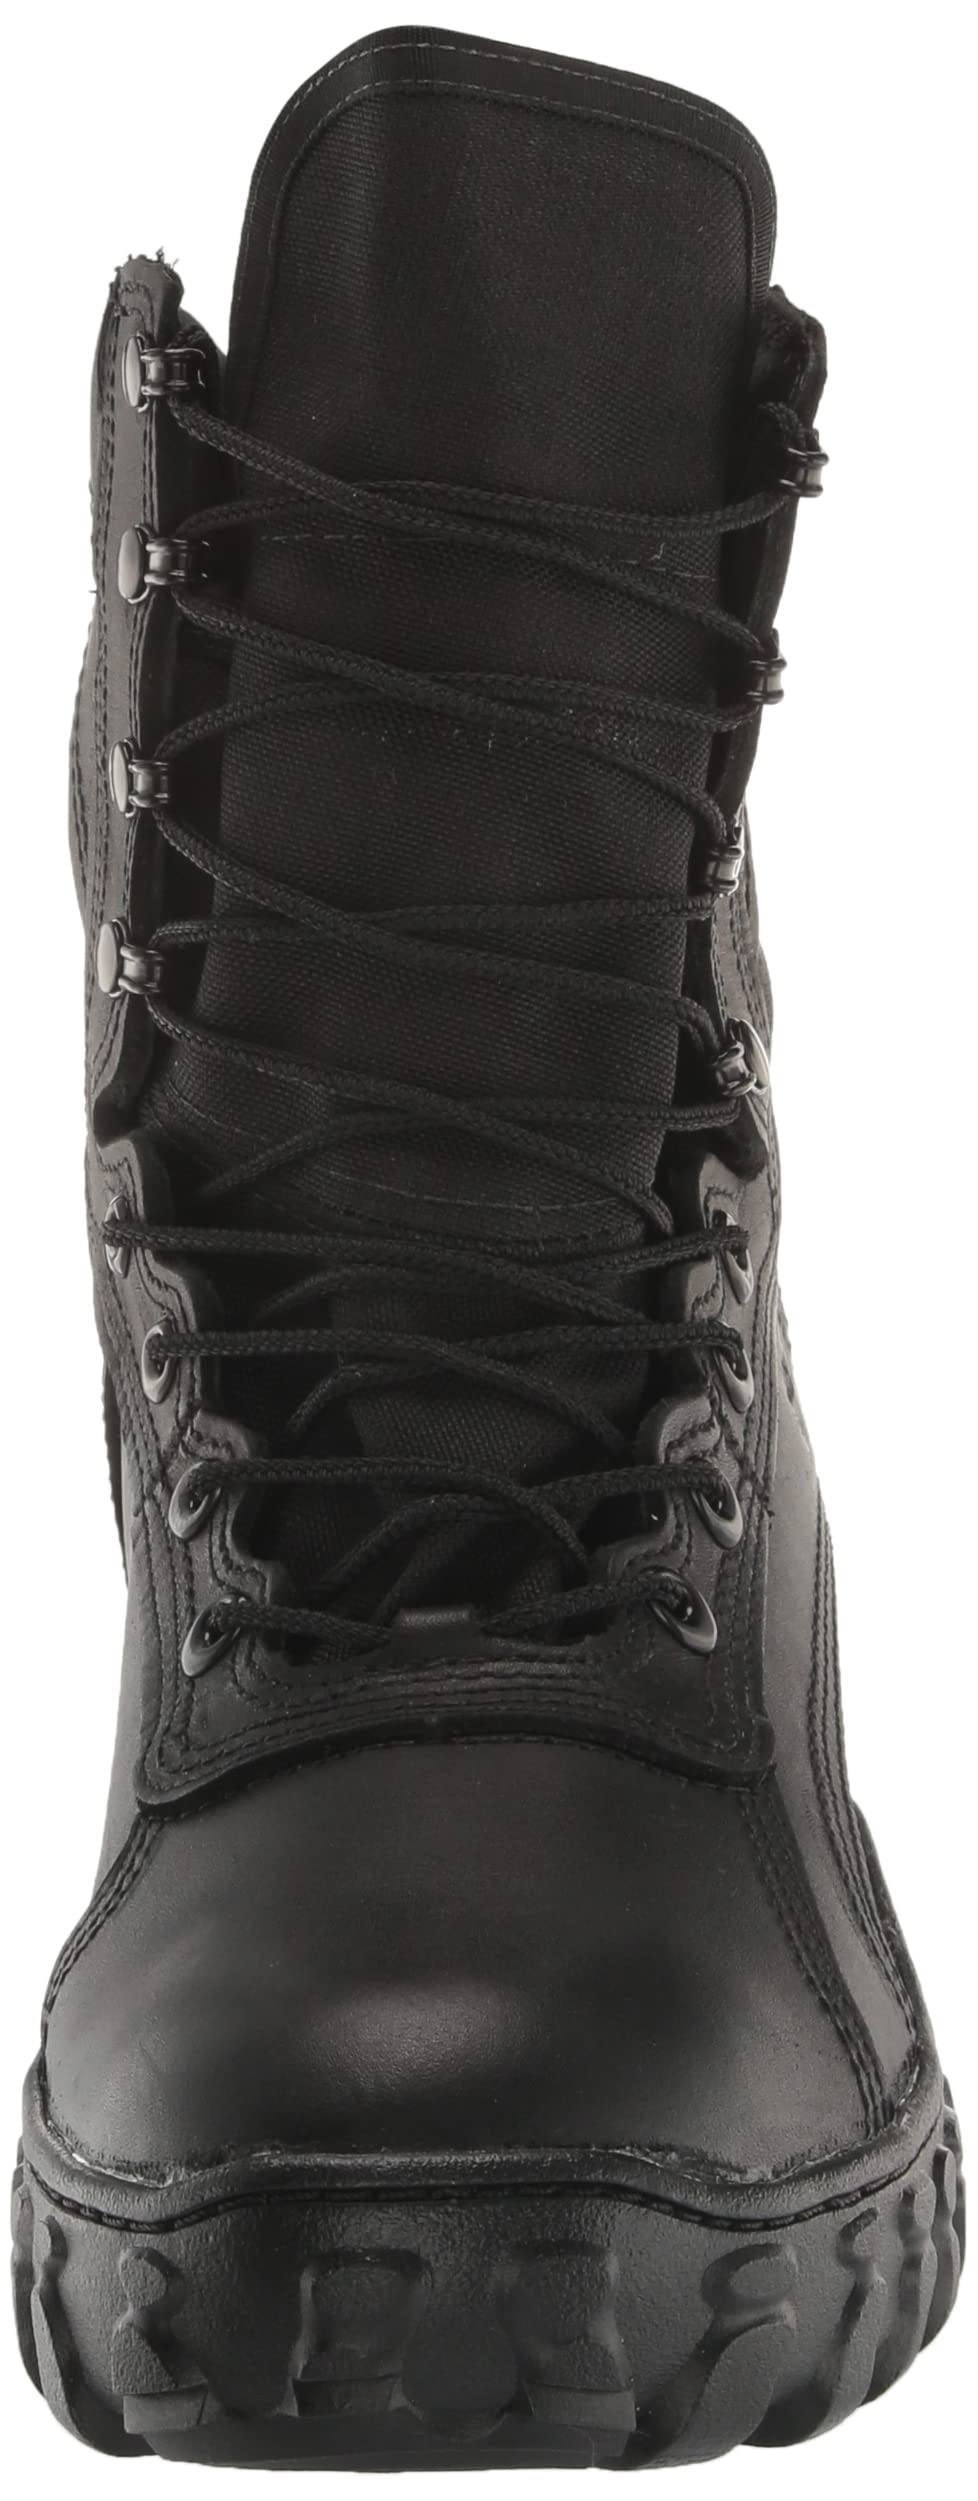 Rocky Men's S2v Military and Tactical Boot